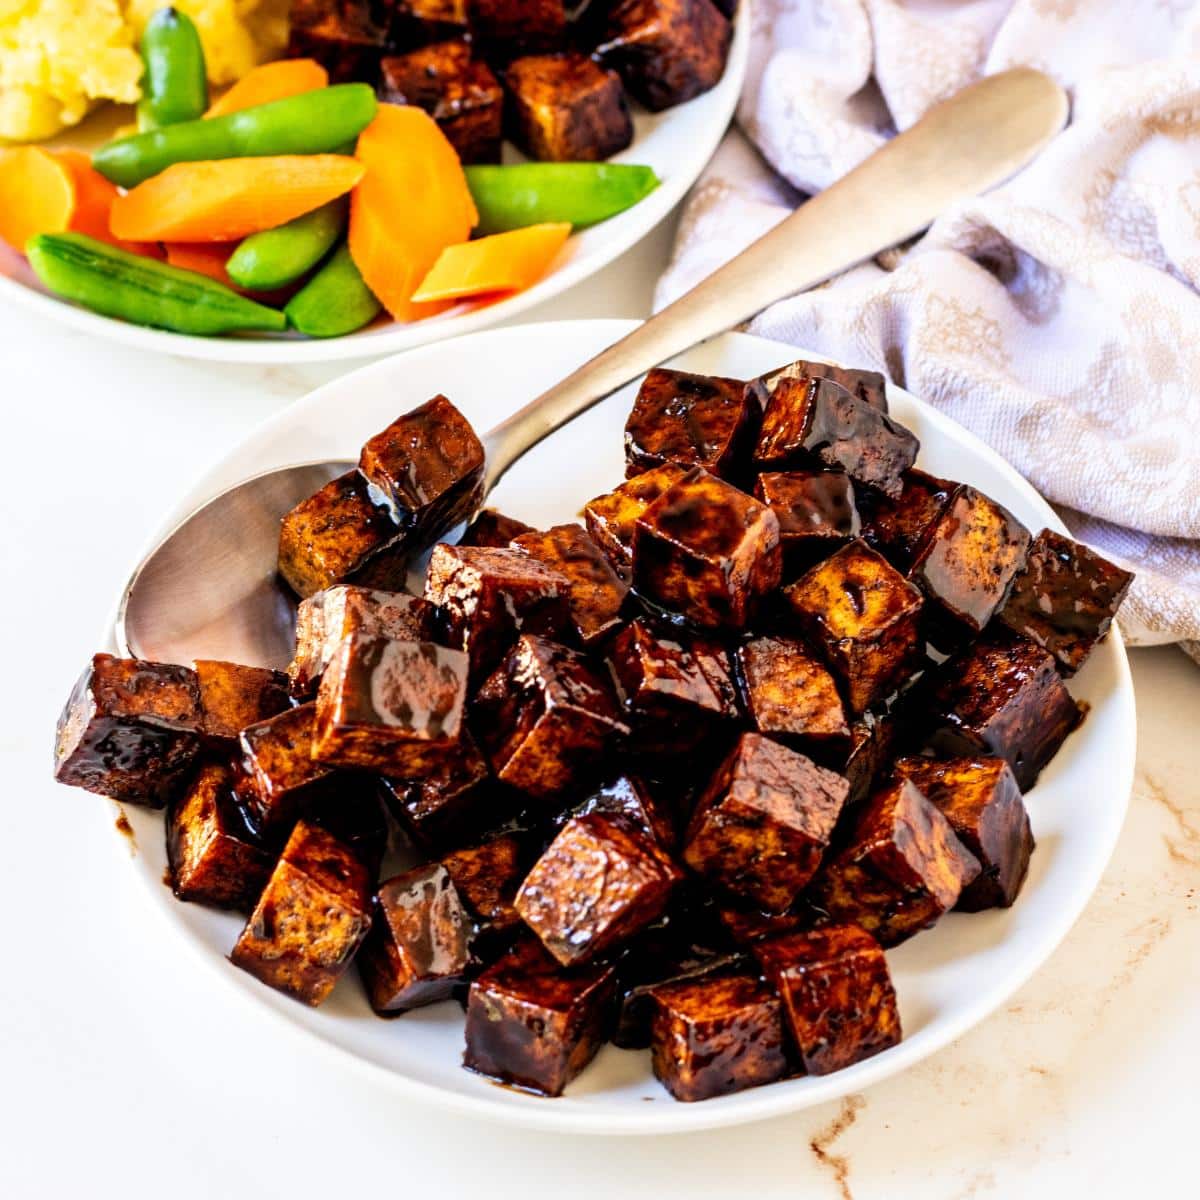 Plate of tofu cubes in a deep brown sauce.